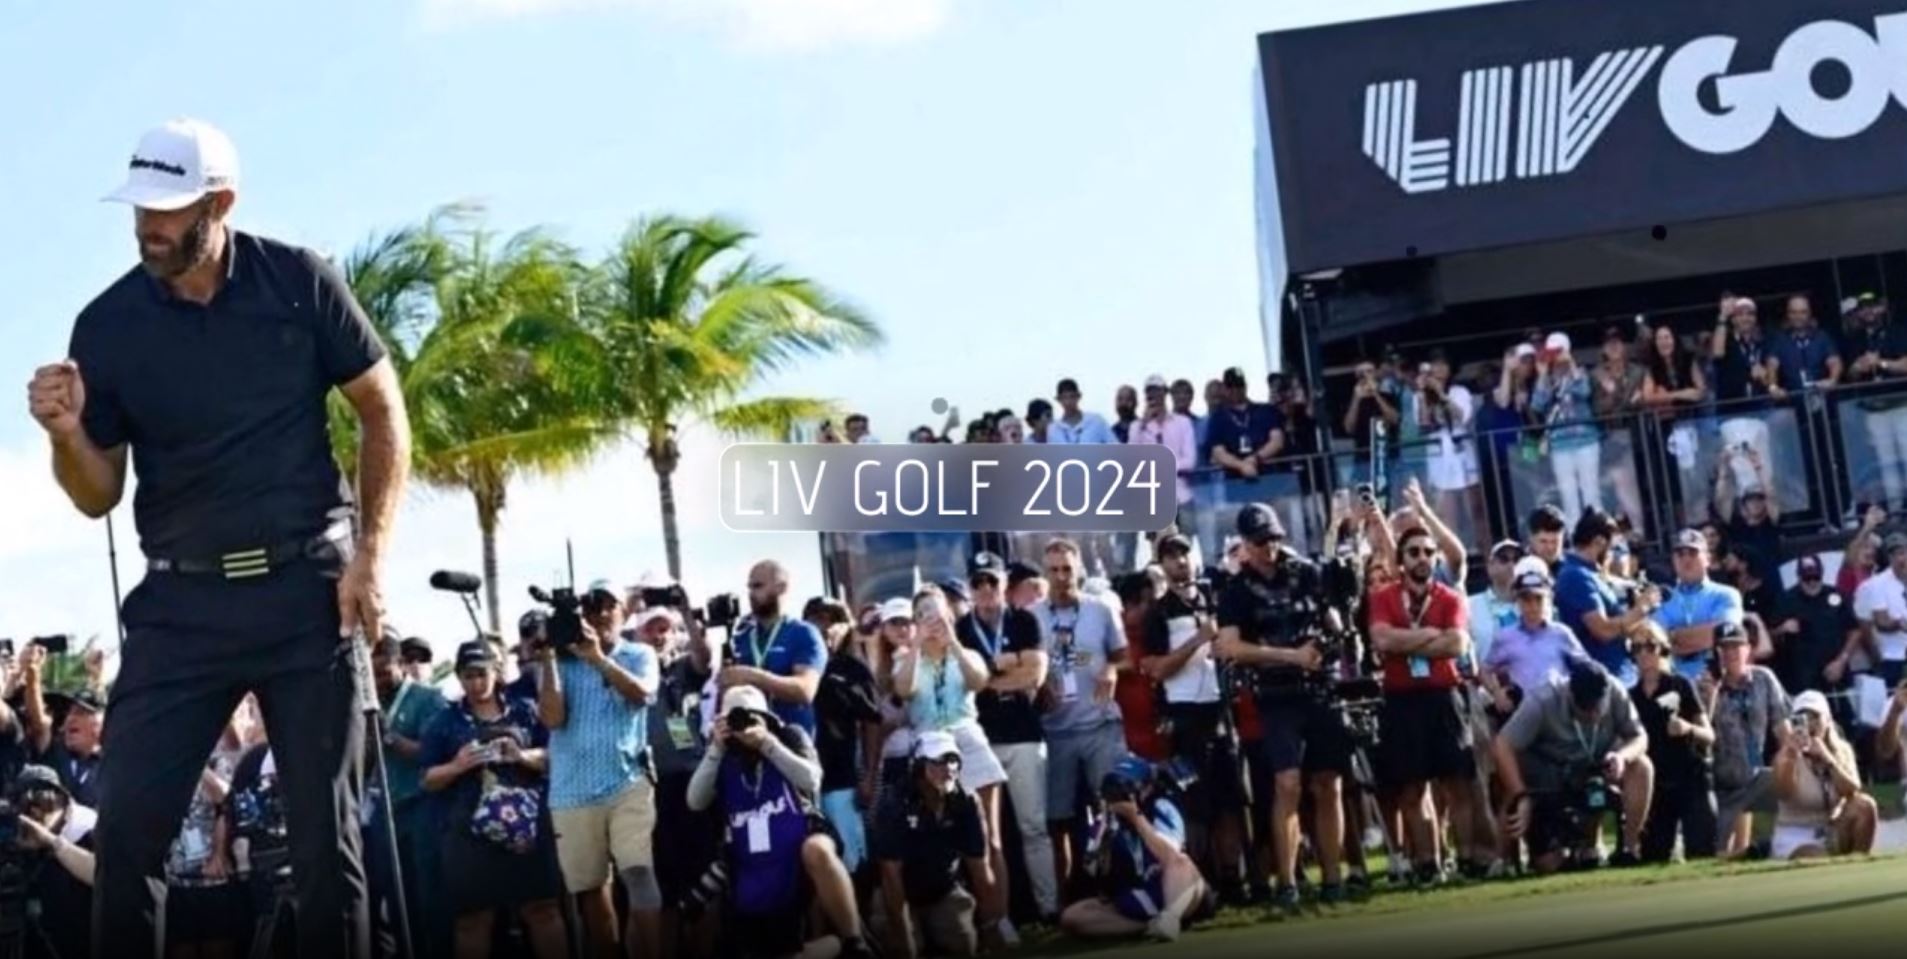 Buy vip tickets and corporate hospitality to every liv golf tournament in 2024